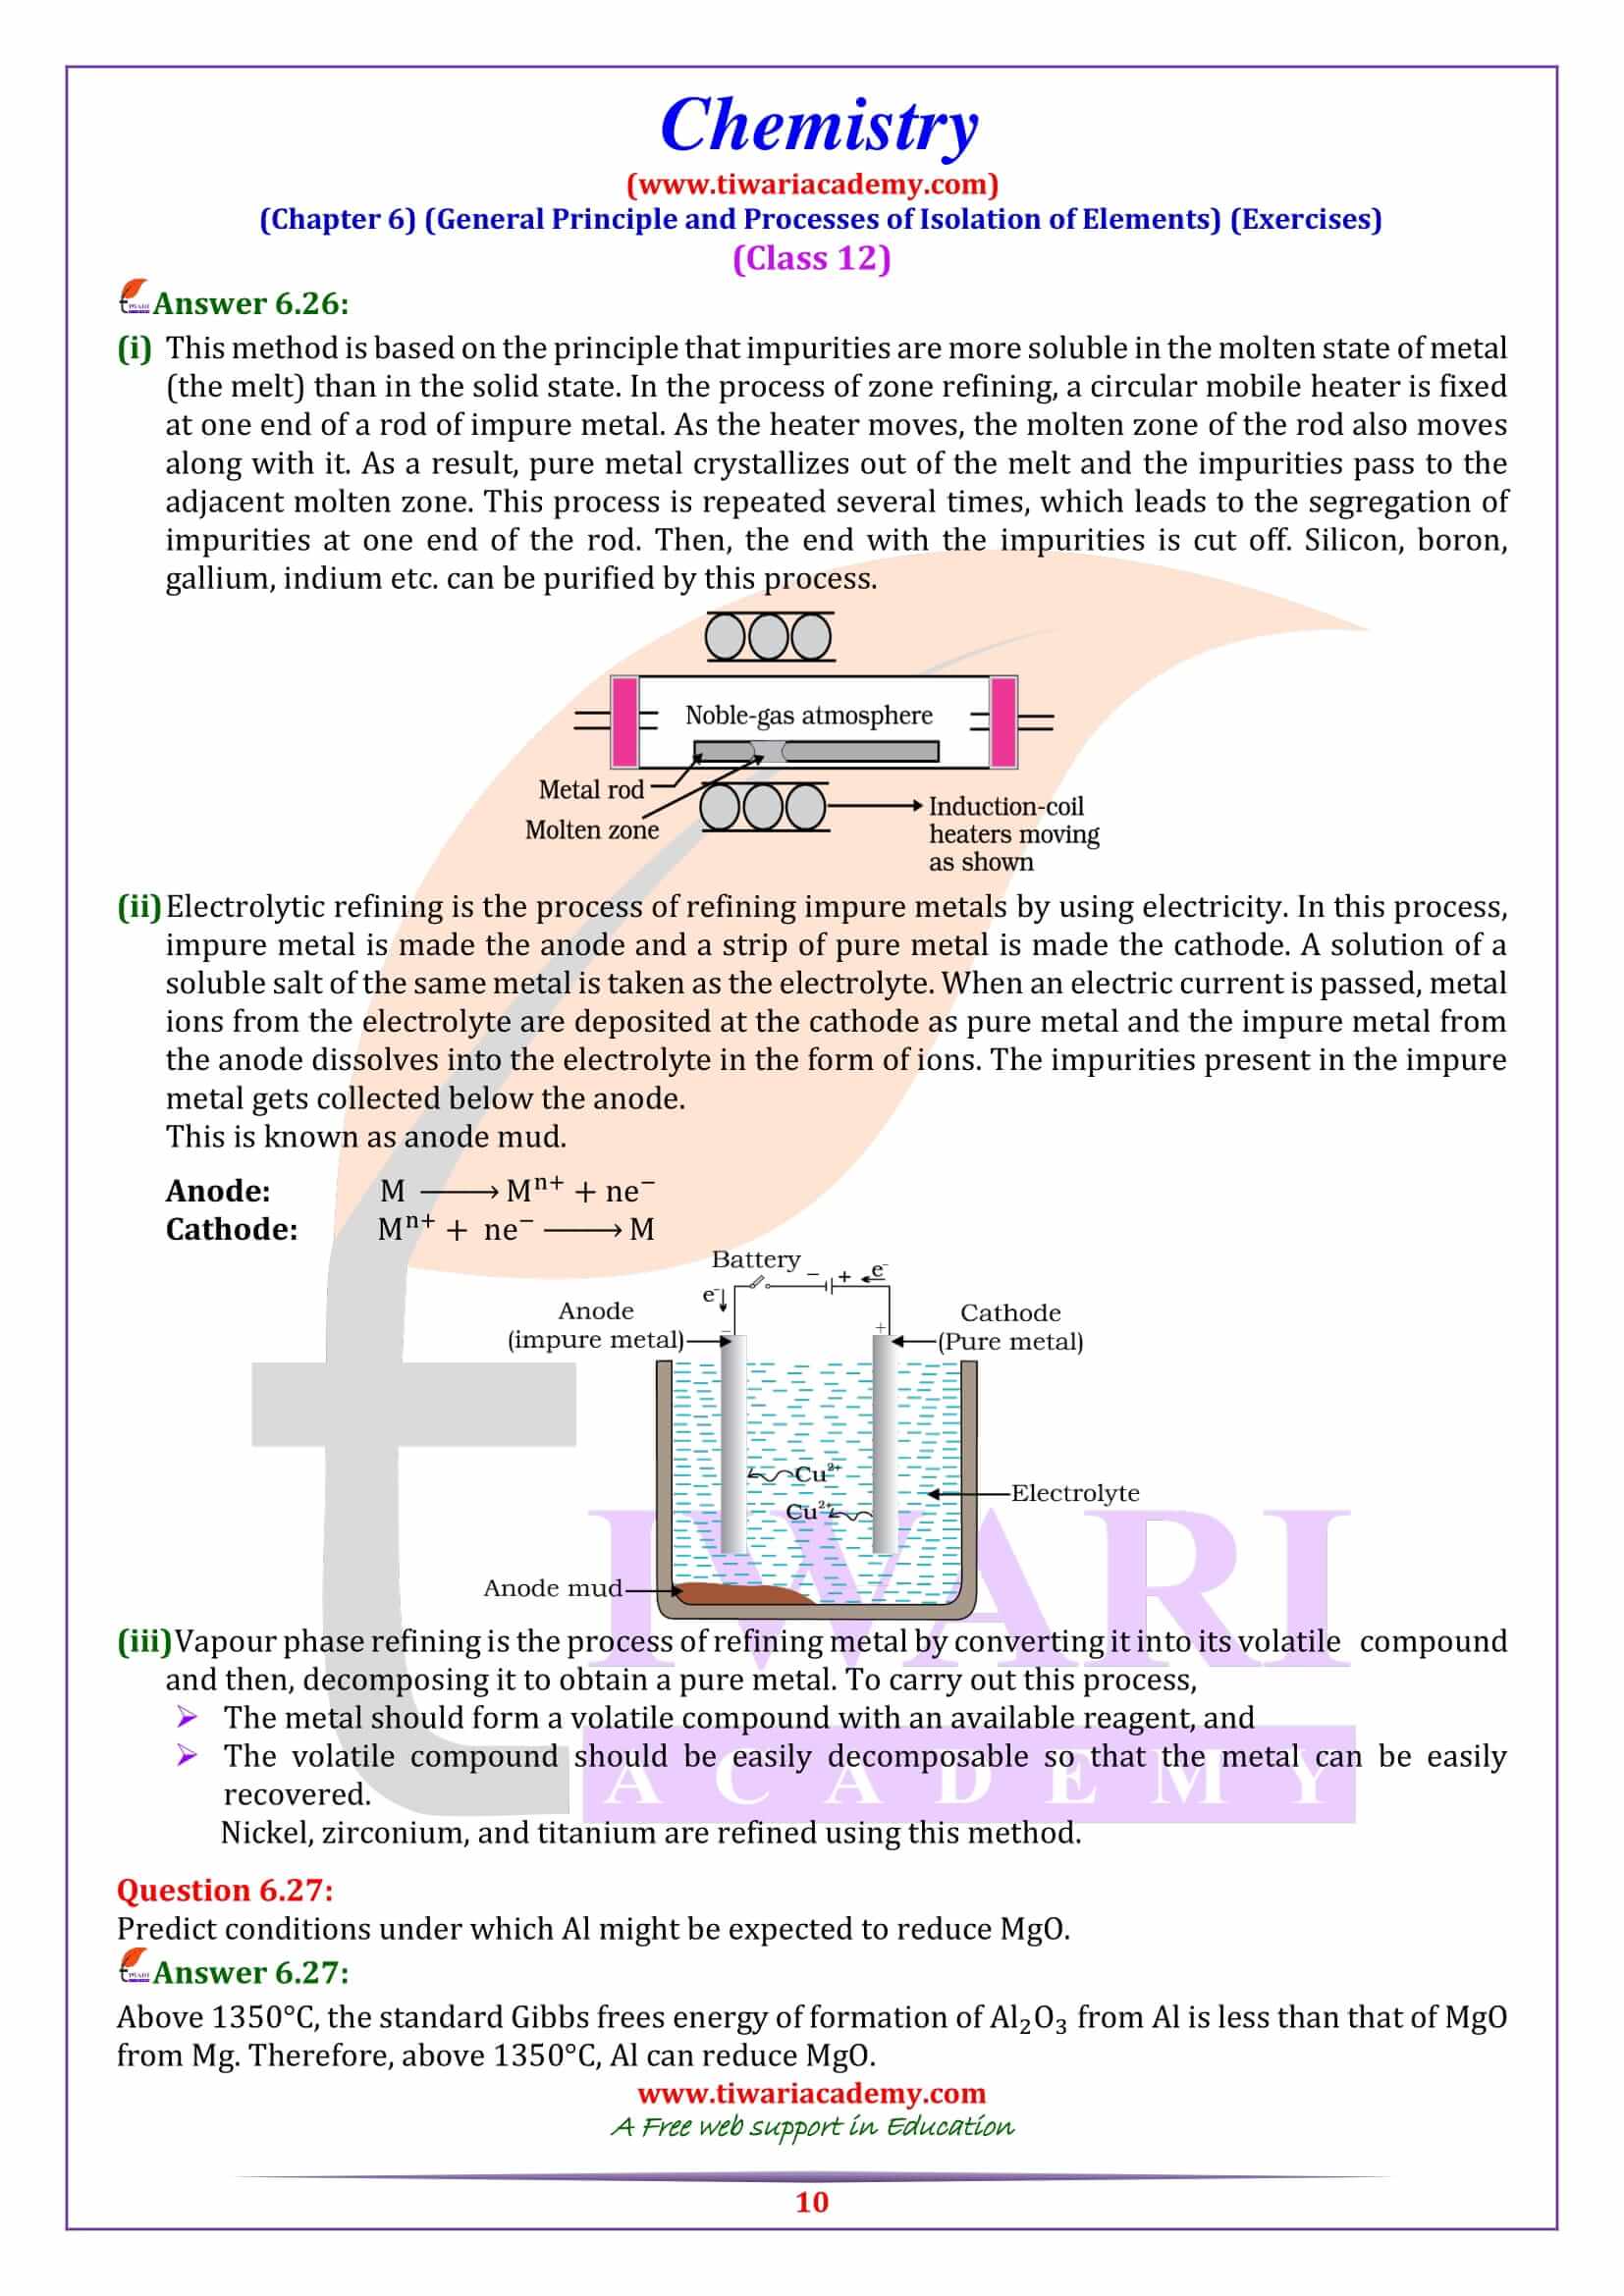 Class 12 Chemistry Chapter 6